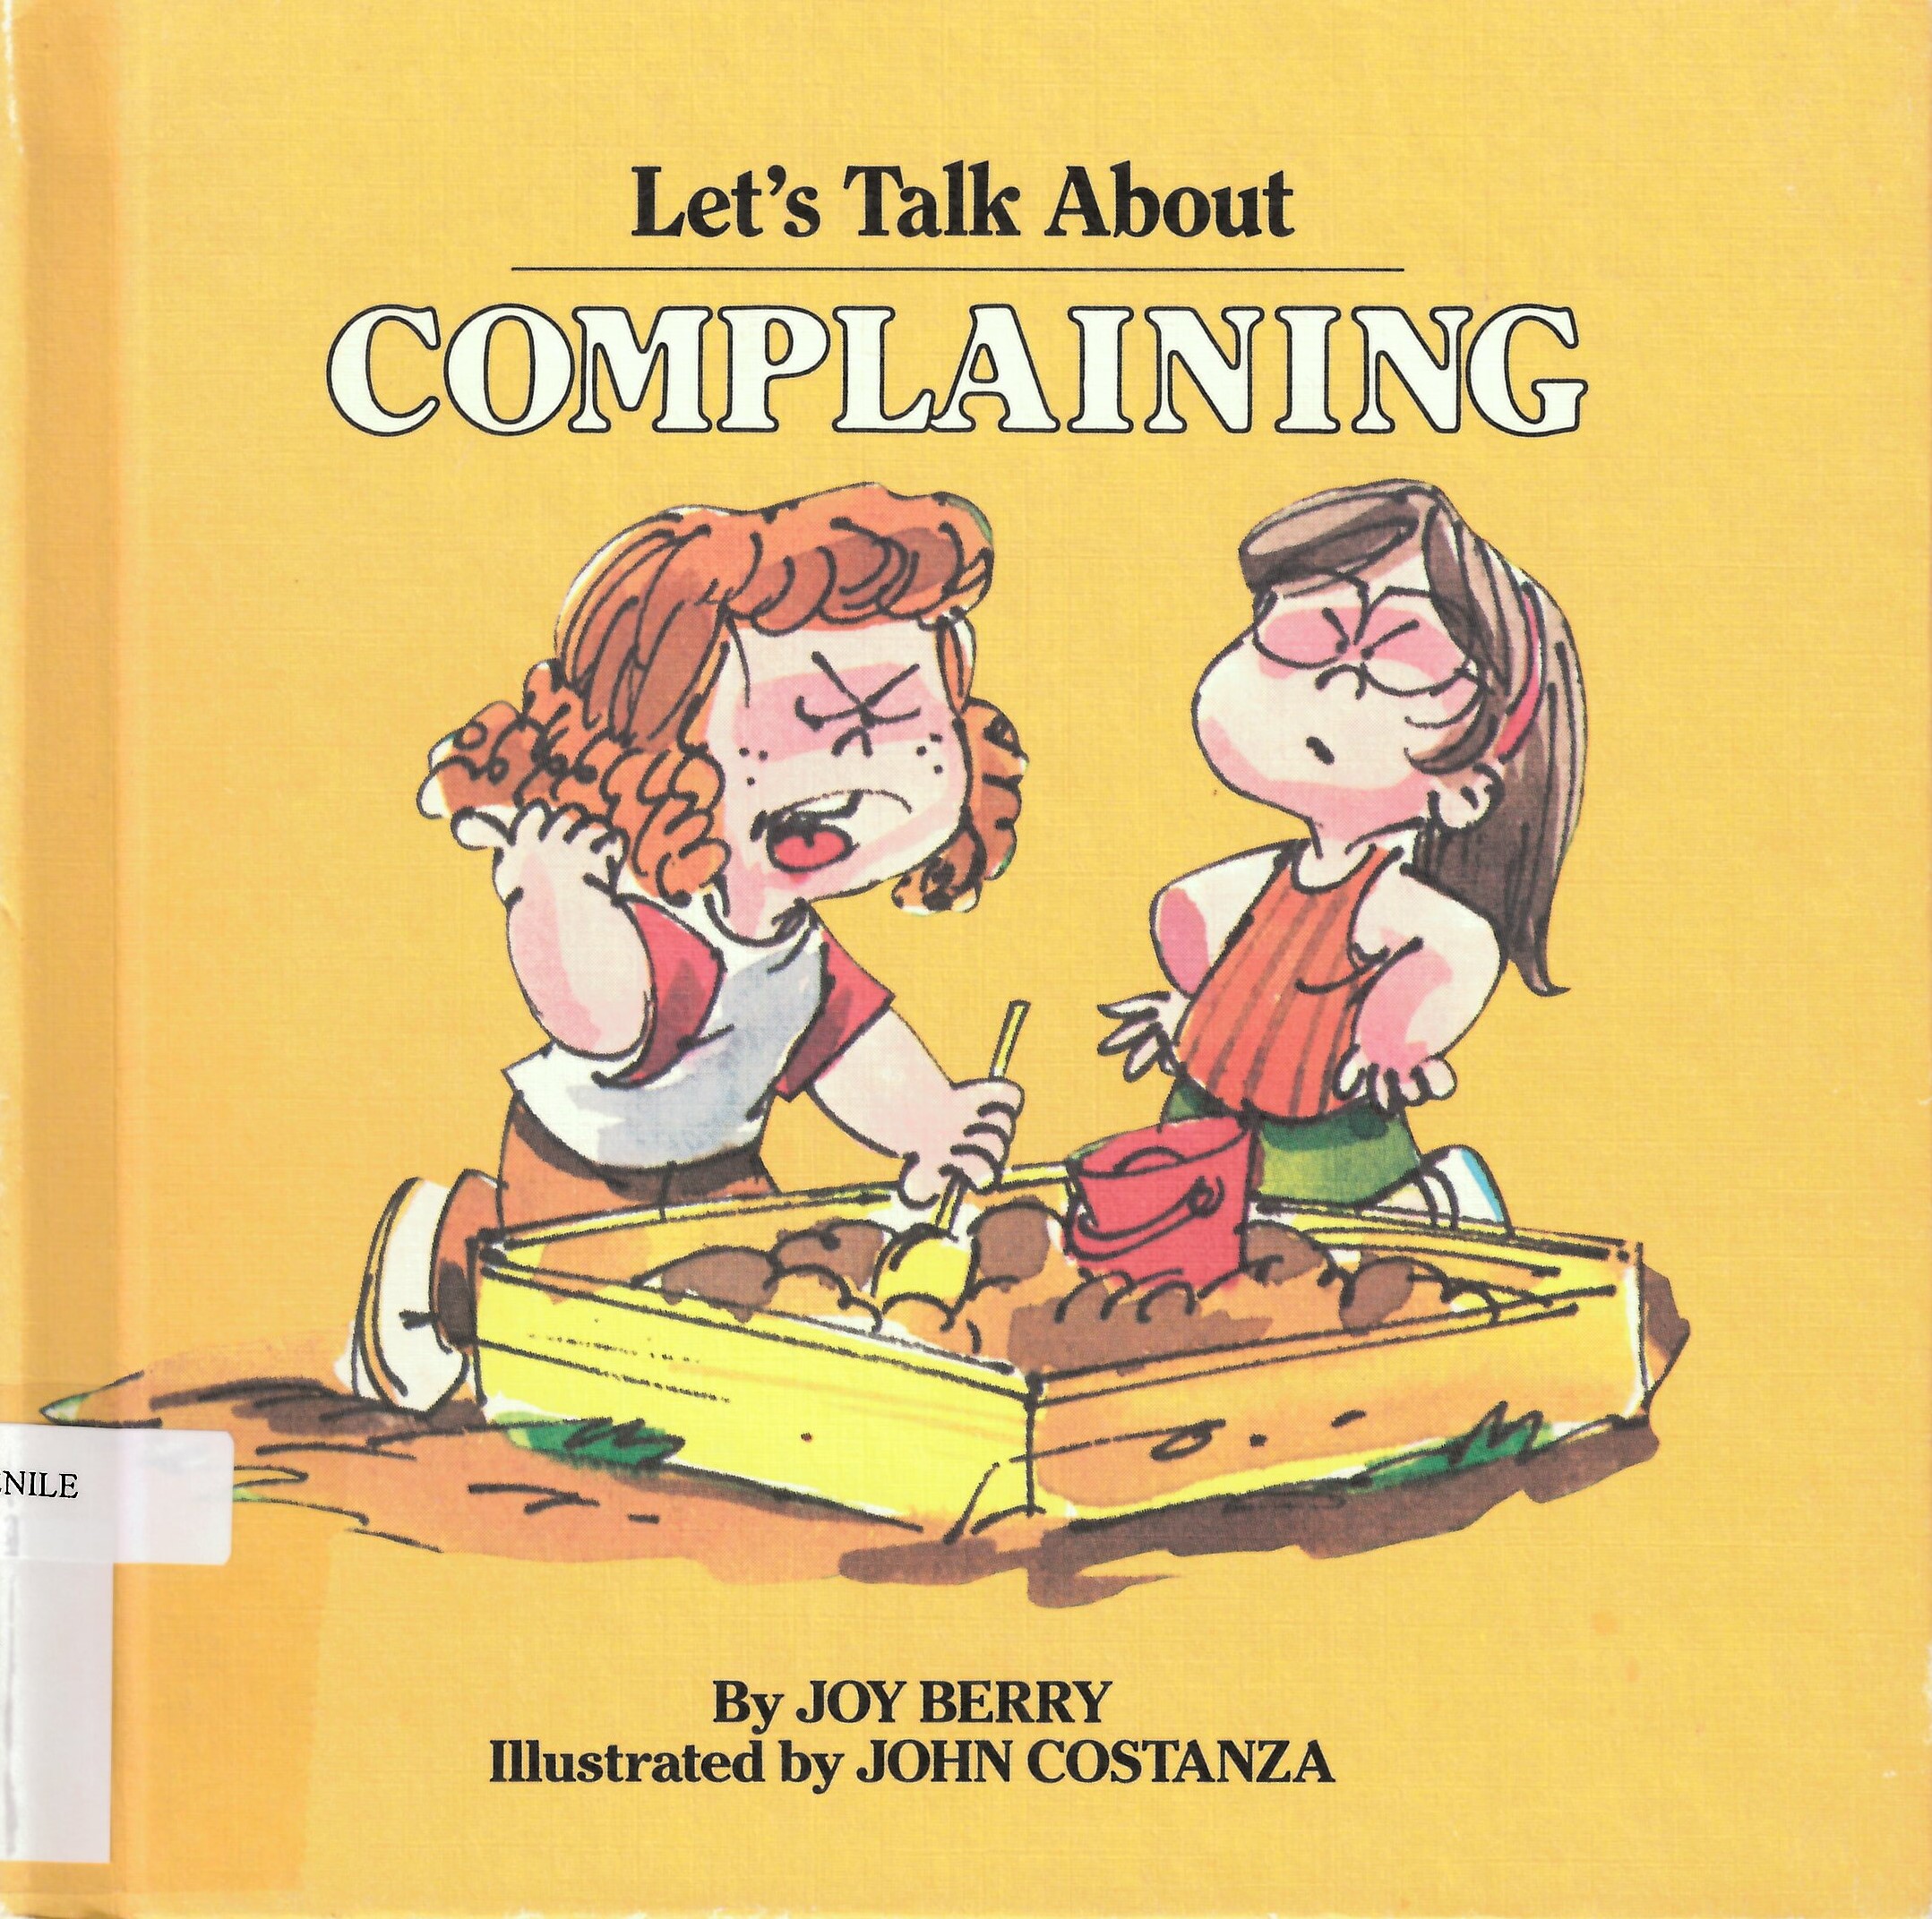 Let's talk about complaining